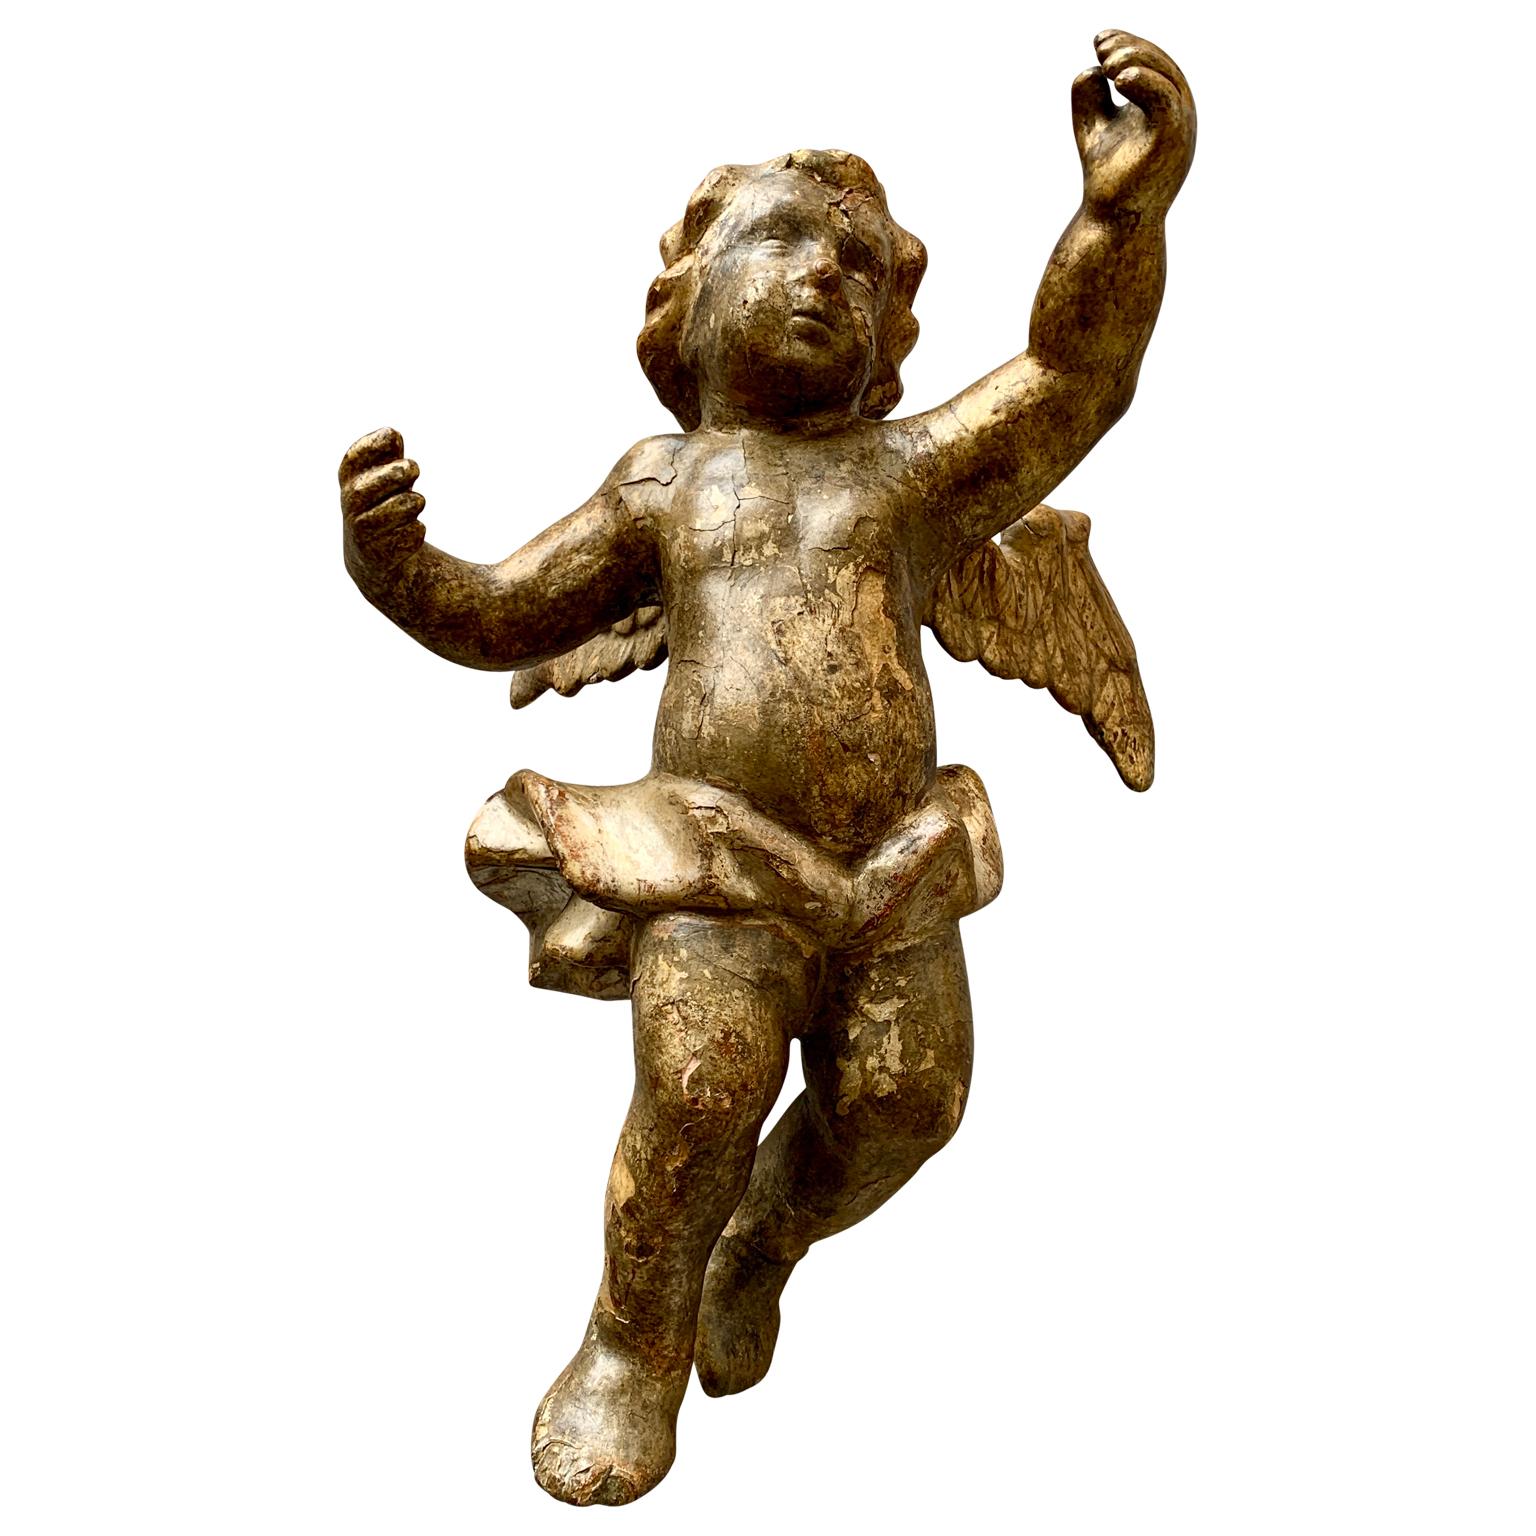 A period European Louis XVI or Gustavian hand-carved and gilt hanging angel spreading its wings. The wooden hand-carved and silvered angel has small insignificant damages cause by the very high age, but keeps its very rare original patina. The